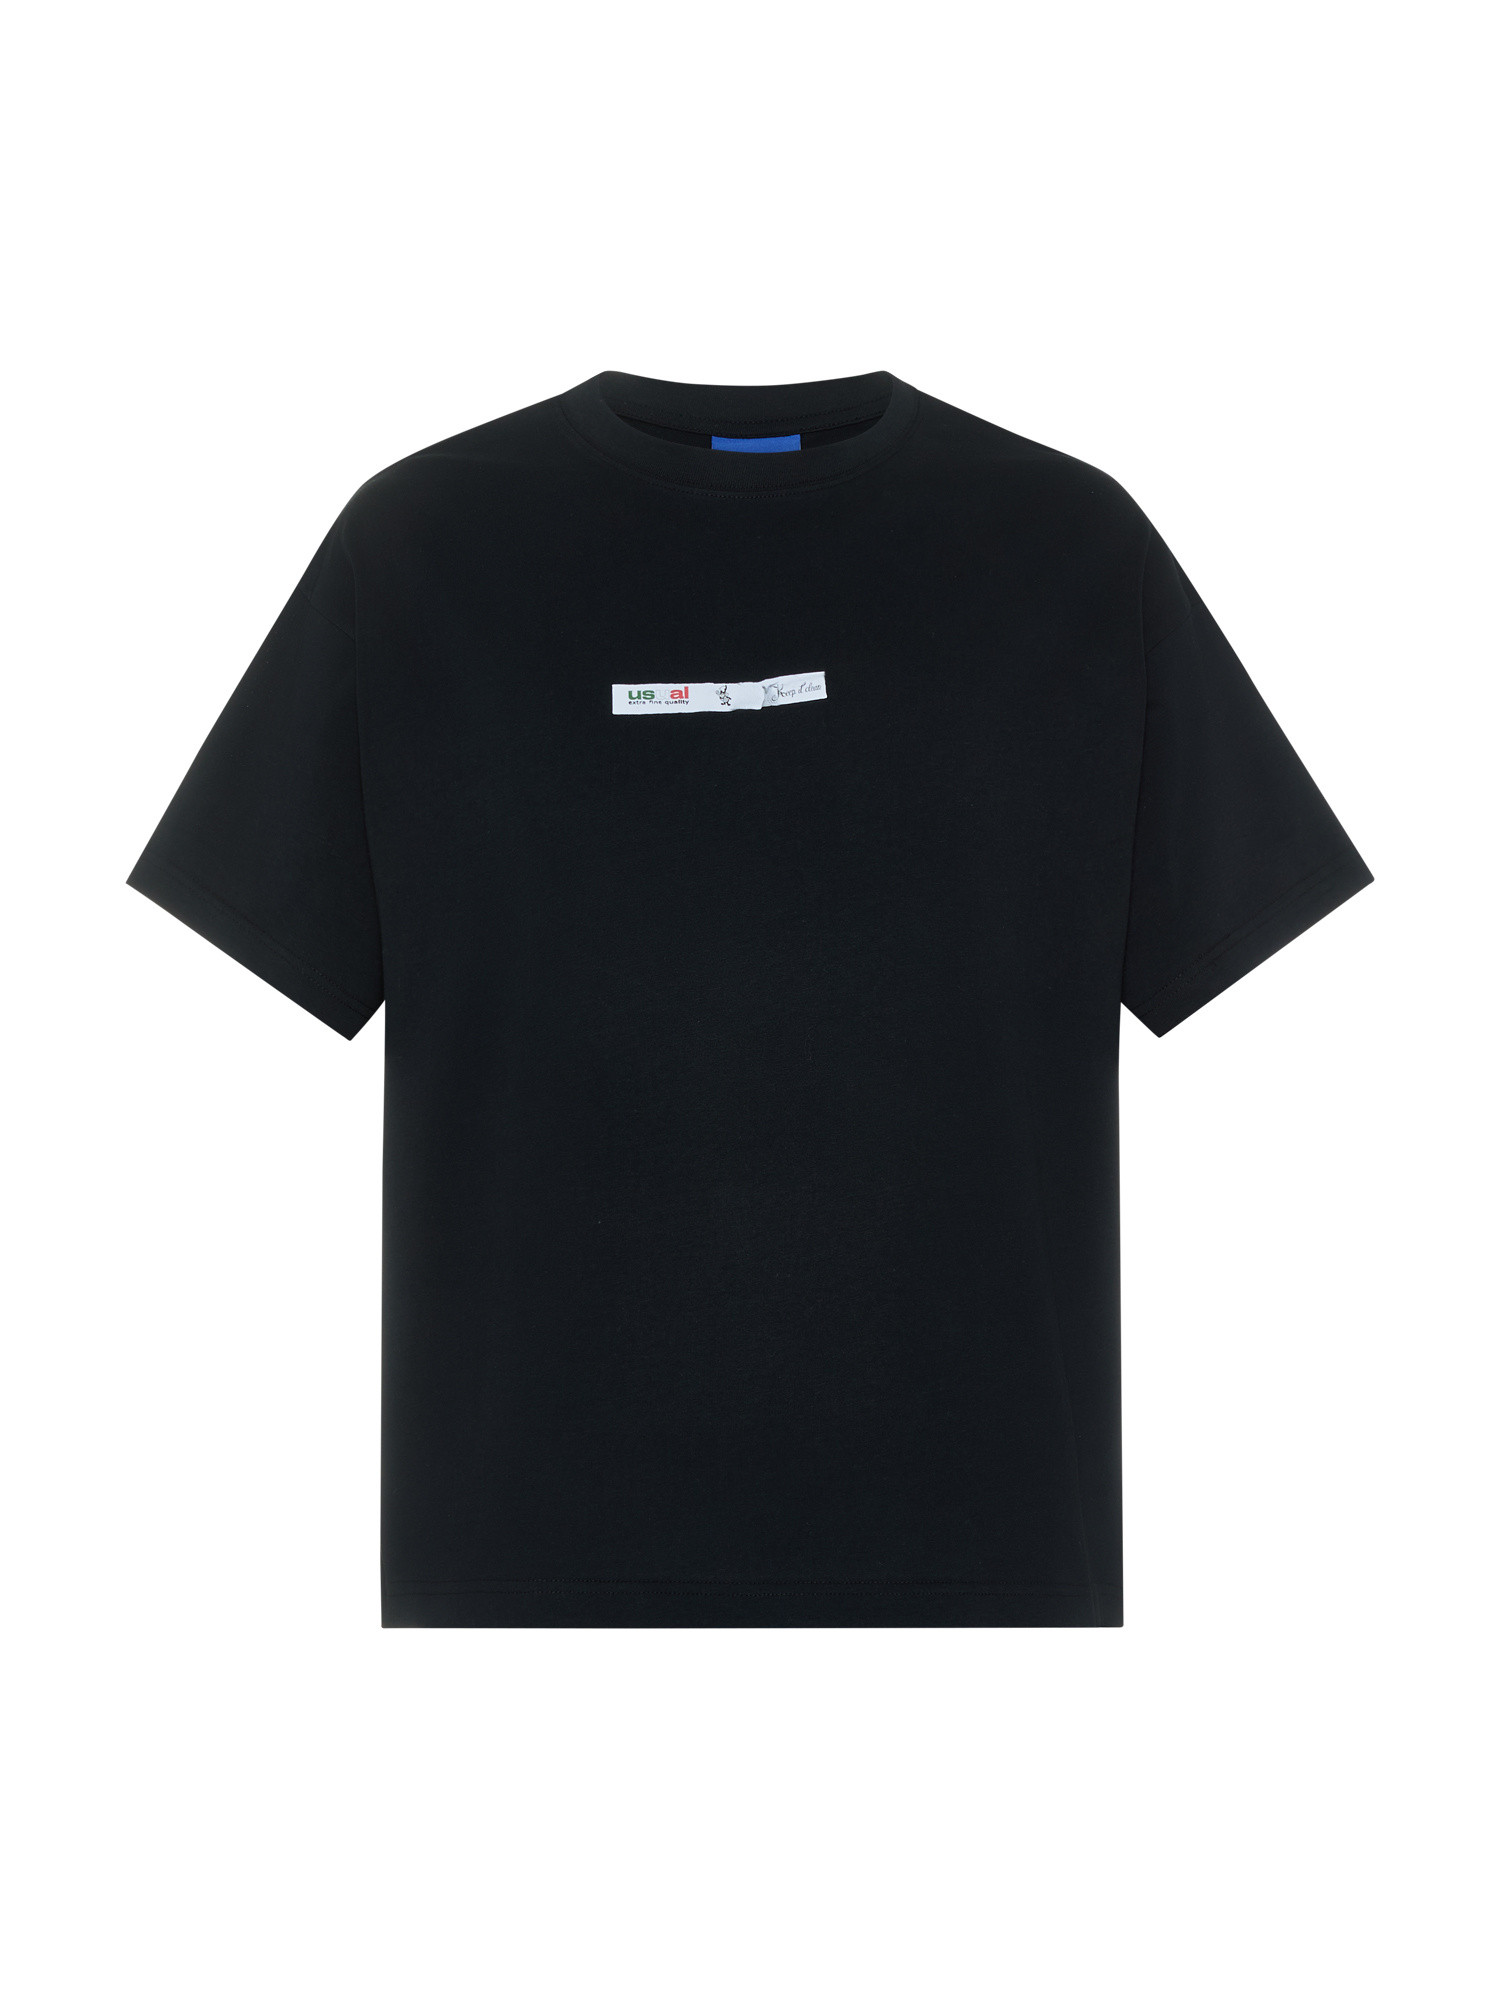 Usual - Trattoria T-Shirt, Black, large image number 0